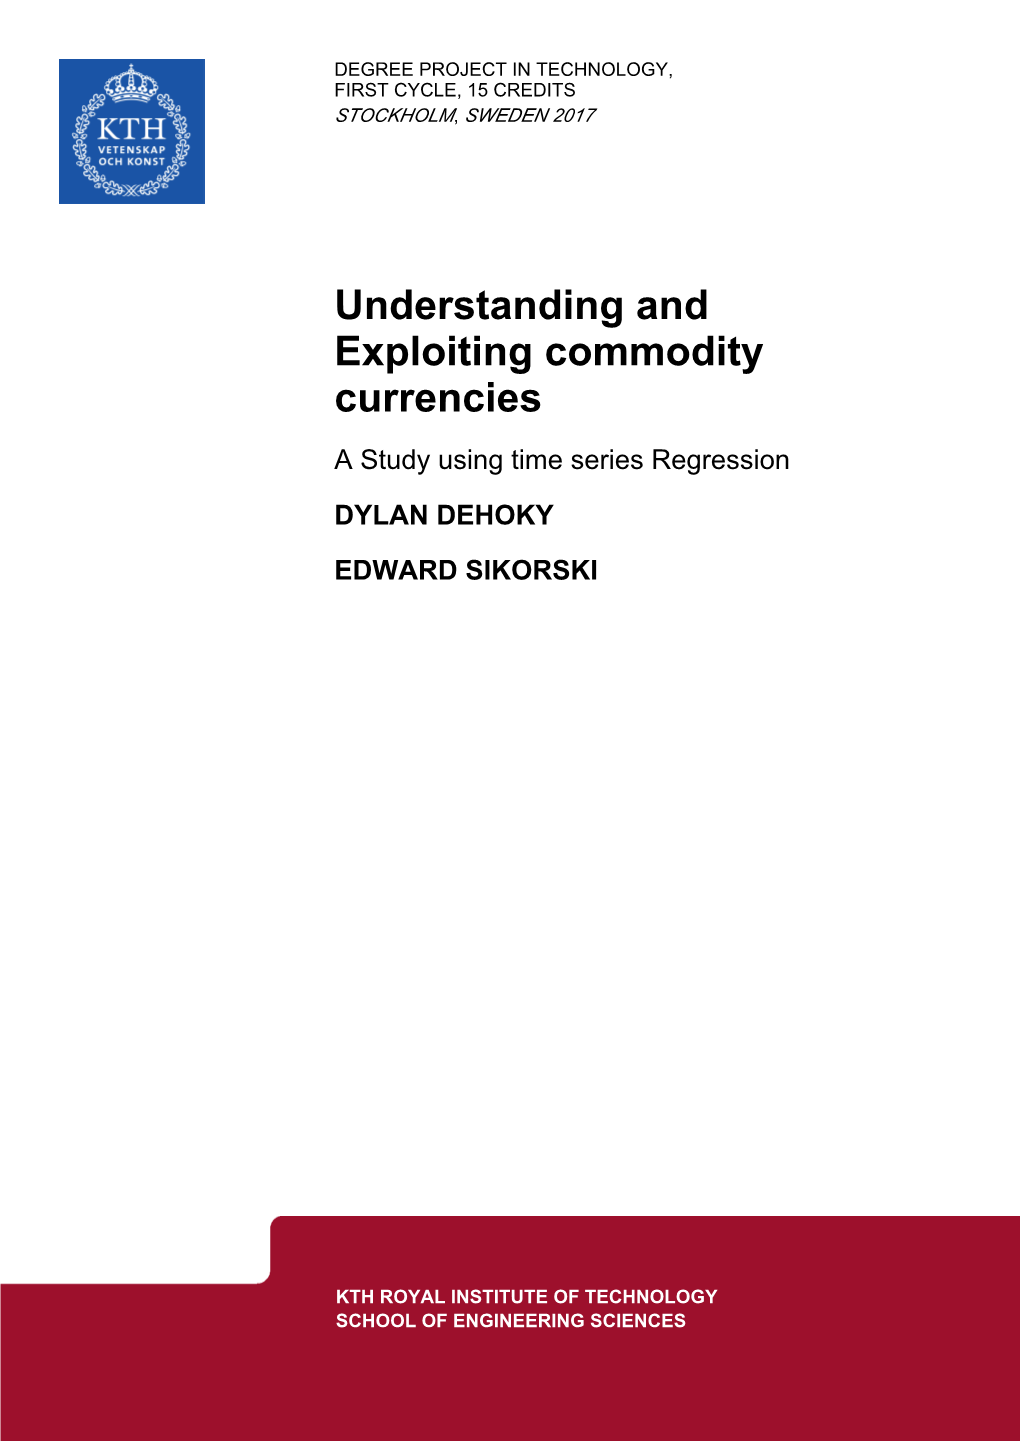 Understanding and Exploiting Commodity Currencies a Study Using Time Series Regression